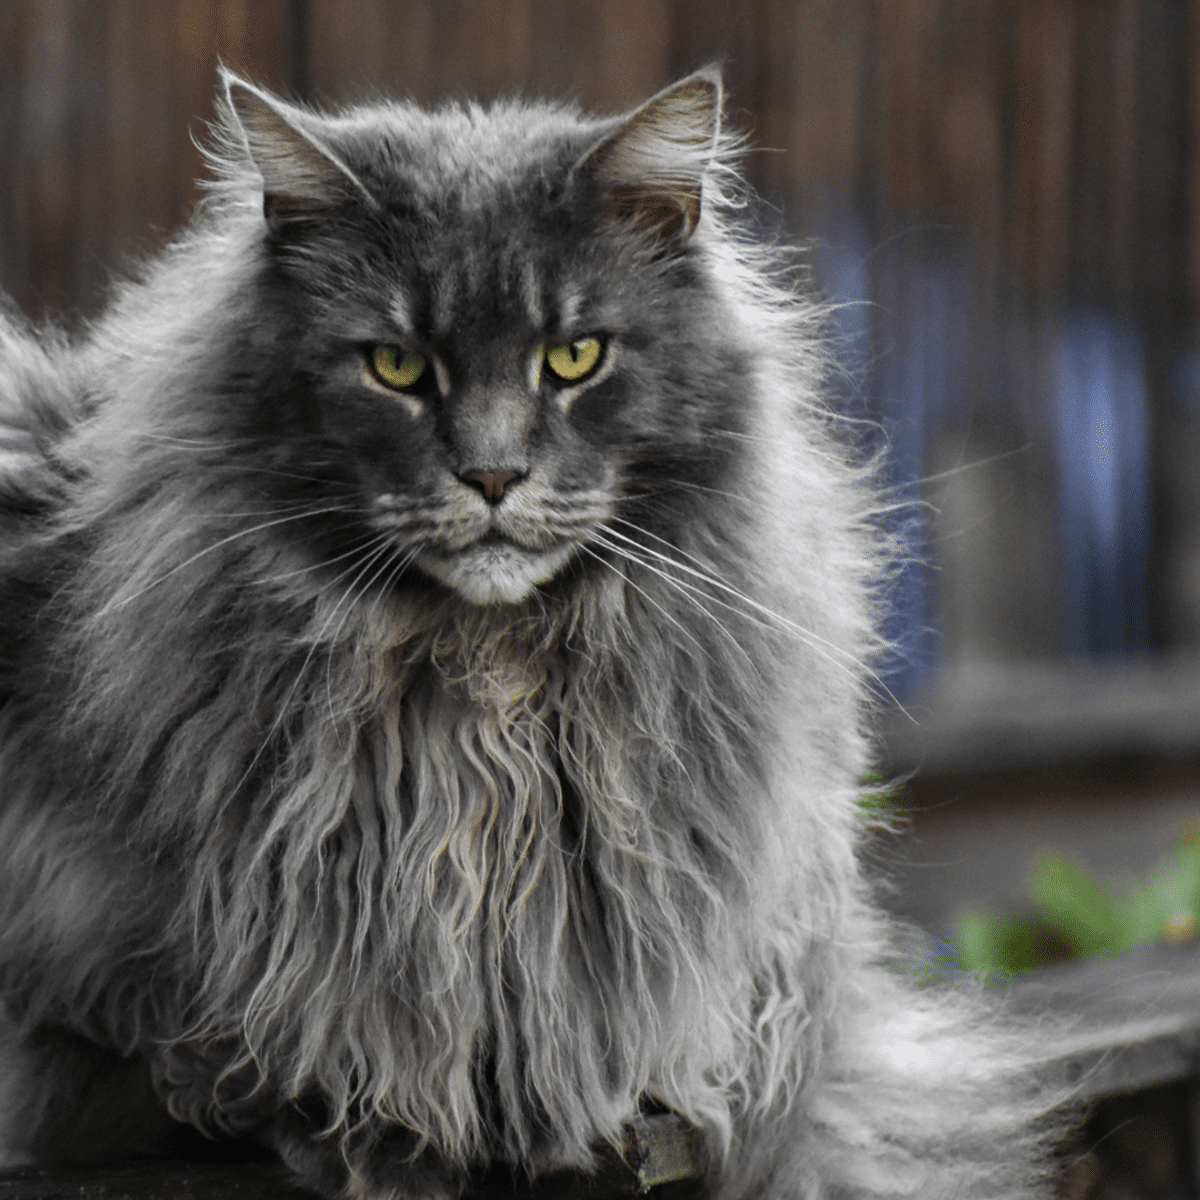 From Ear Tufts to Fluffy Tails: How to Identify Your Pet Cat